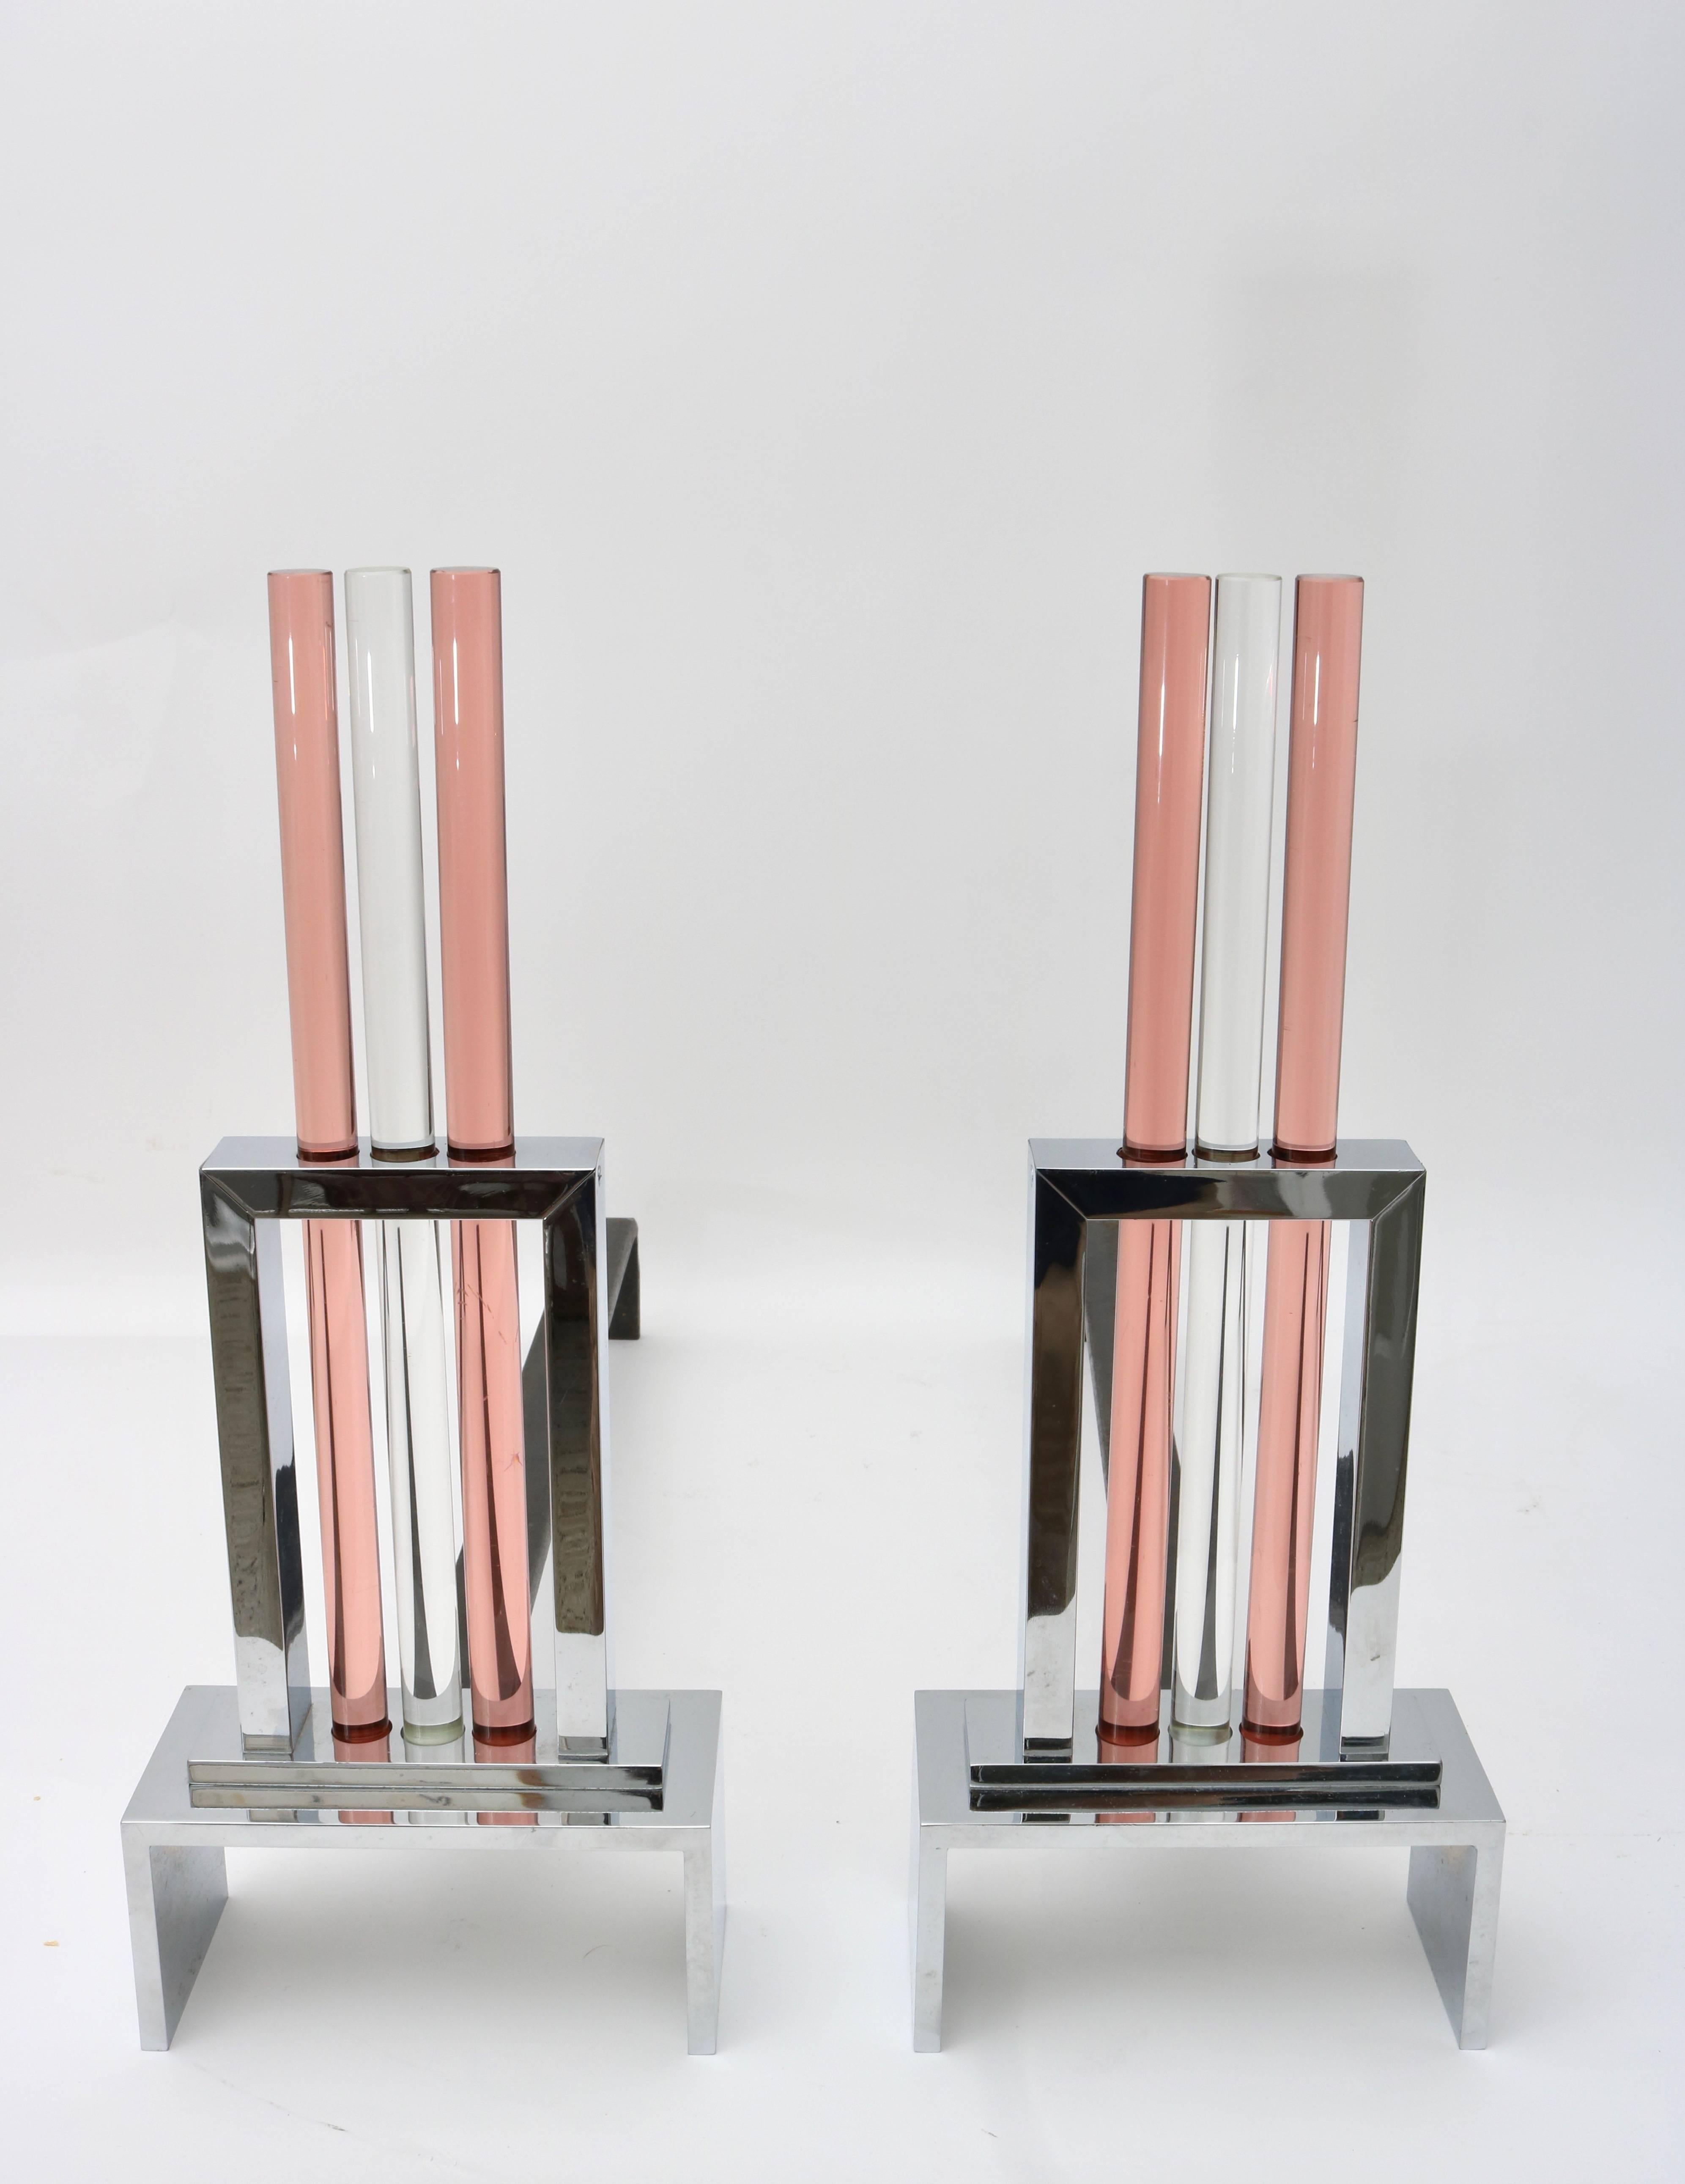 This stylish set of andirons capture the height of the Art Deco period with their architectural look of skyscrapers glistening in the sun. The glass rods are in clear and a rose-gold coloration which complement the polished chrome beautifully.

